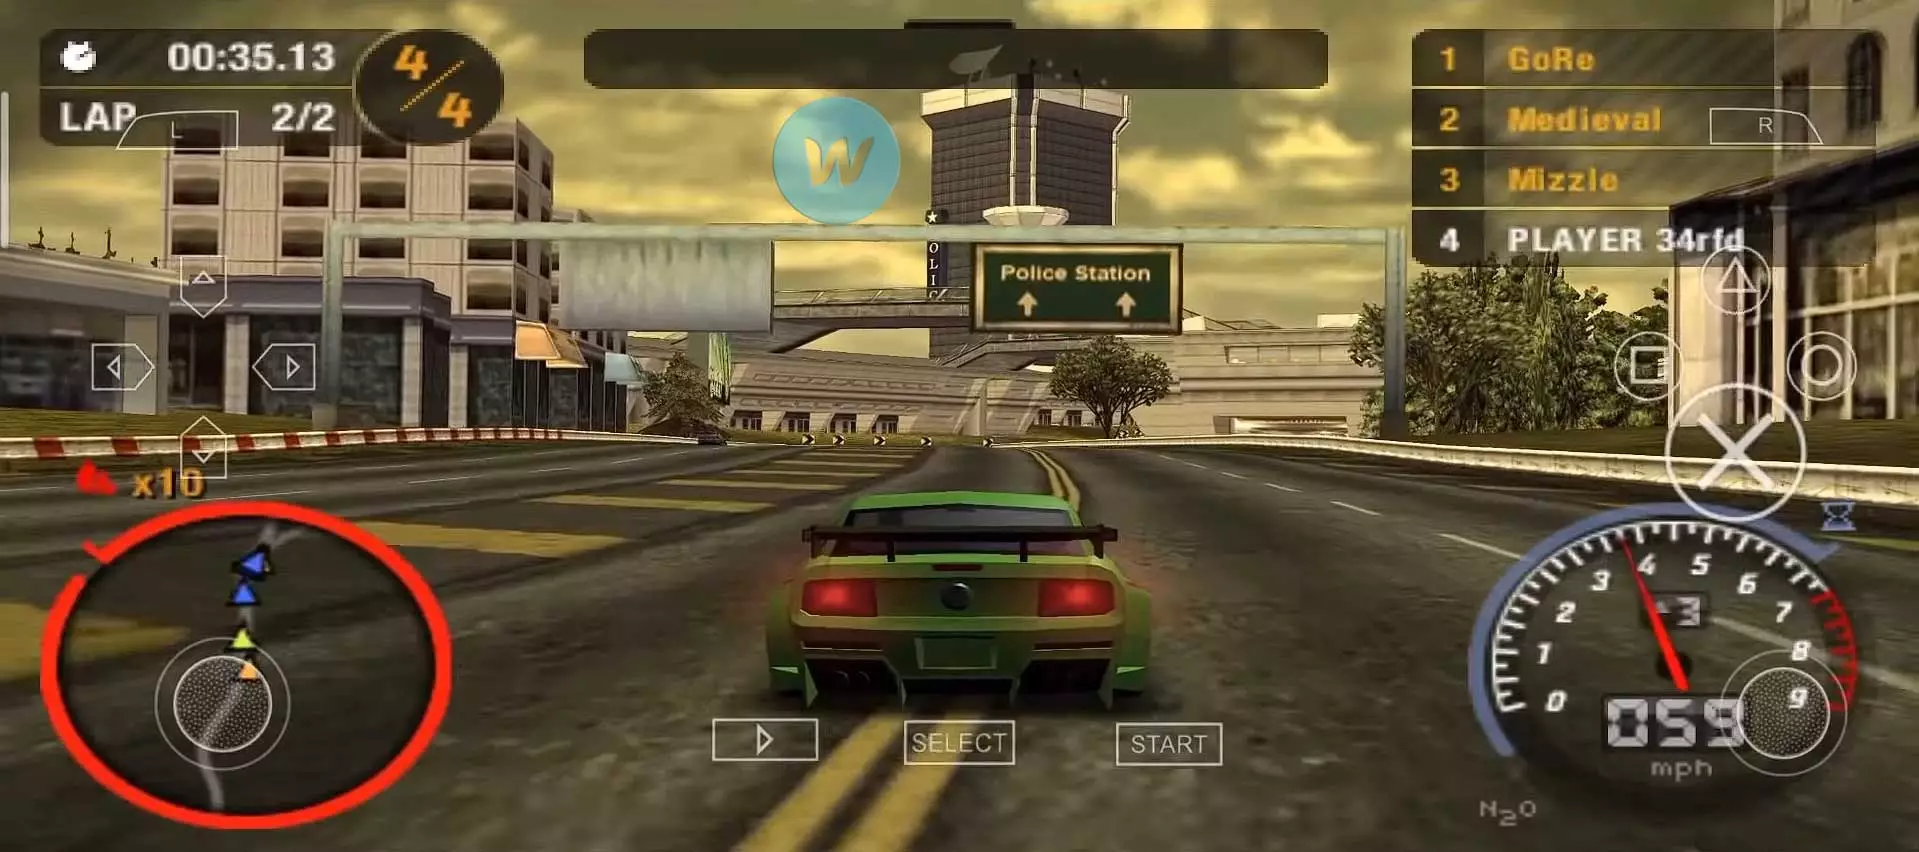 NFS Most Wanted PPSSPP